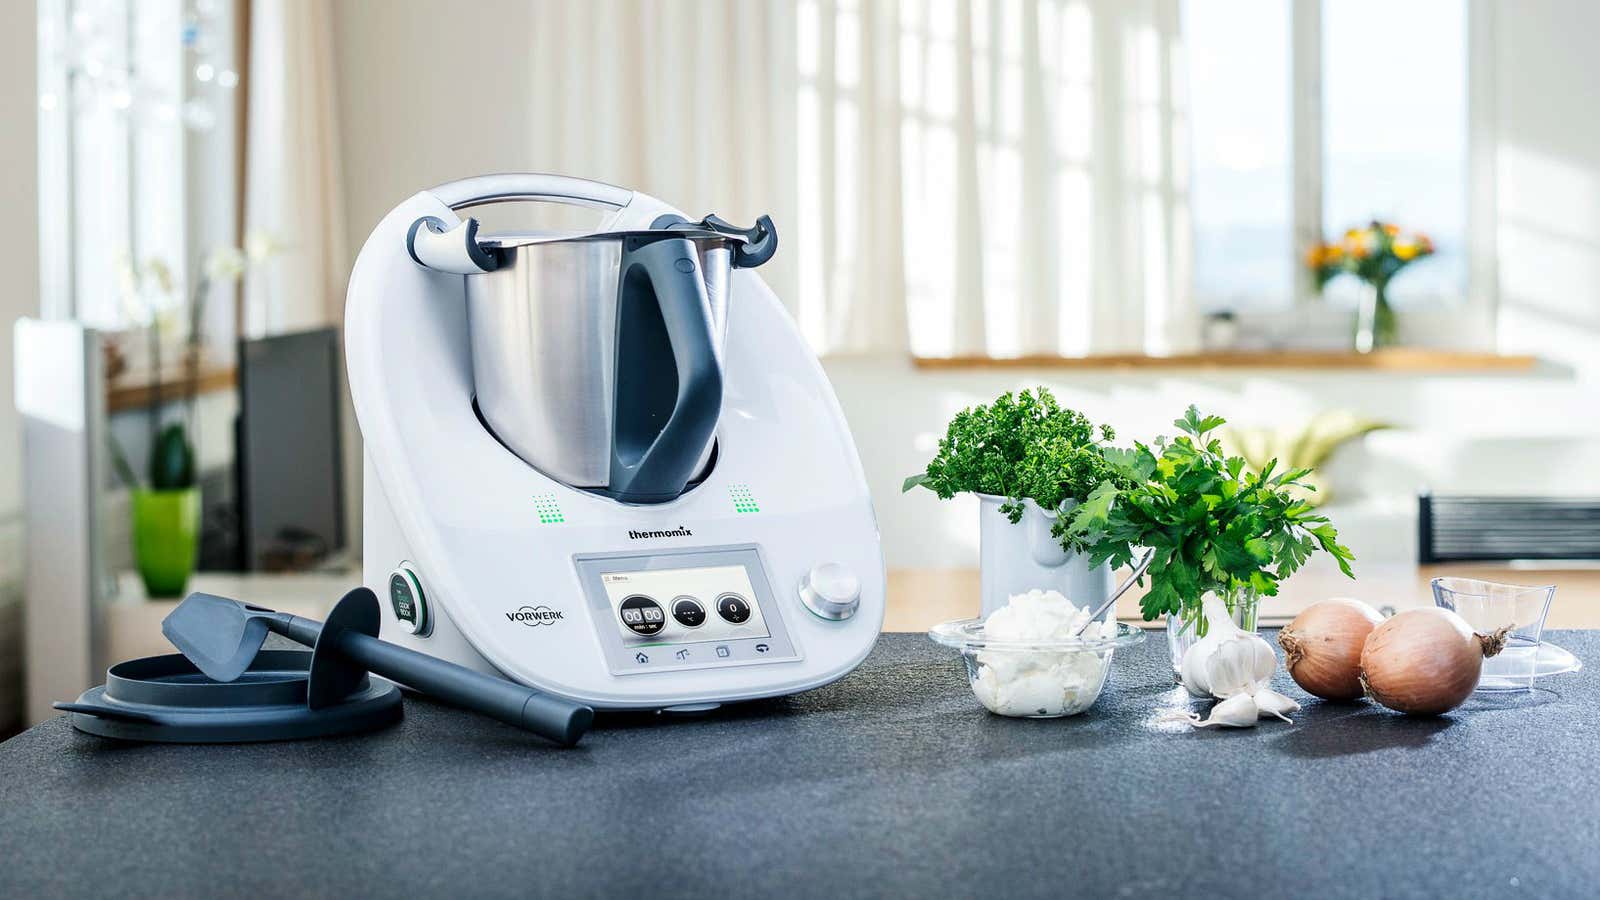 Thermomix, Vorwerks $1,450 kitchen appliance, is coming to the US image